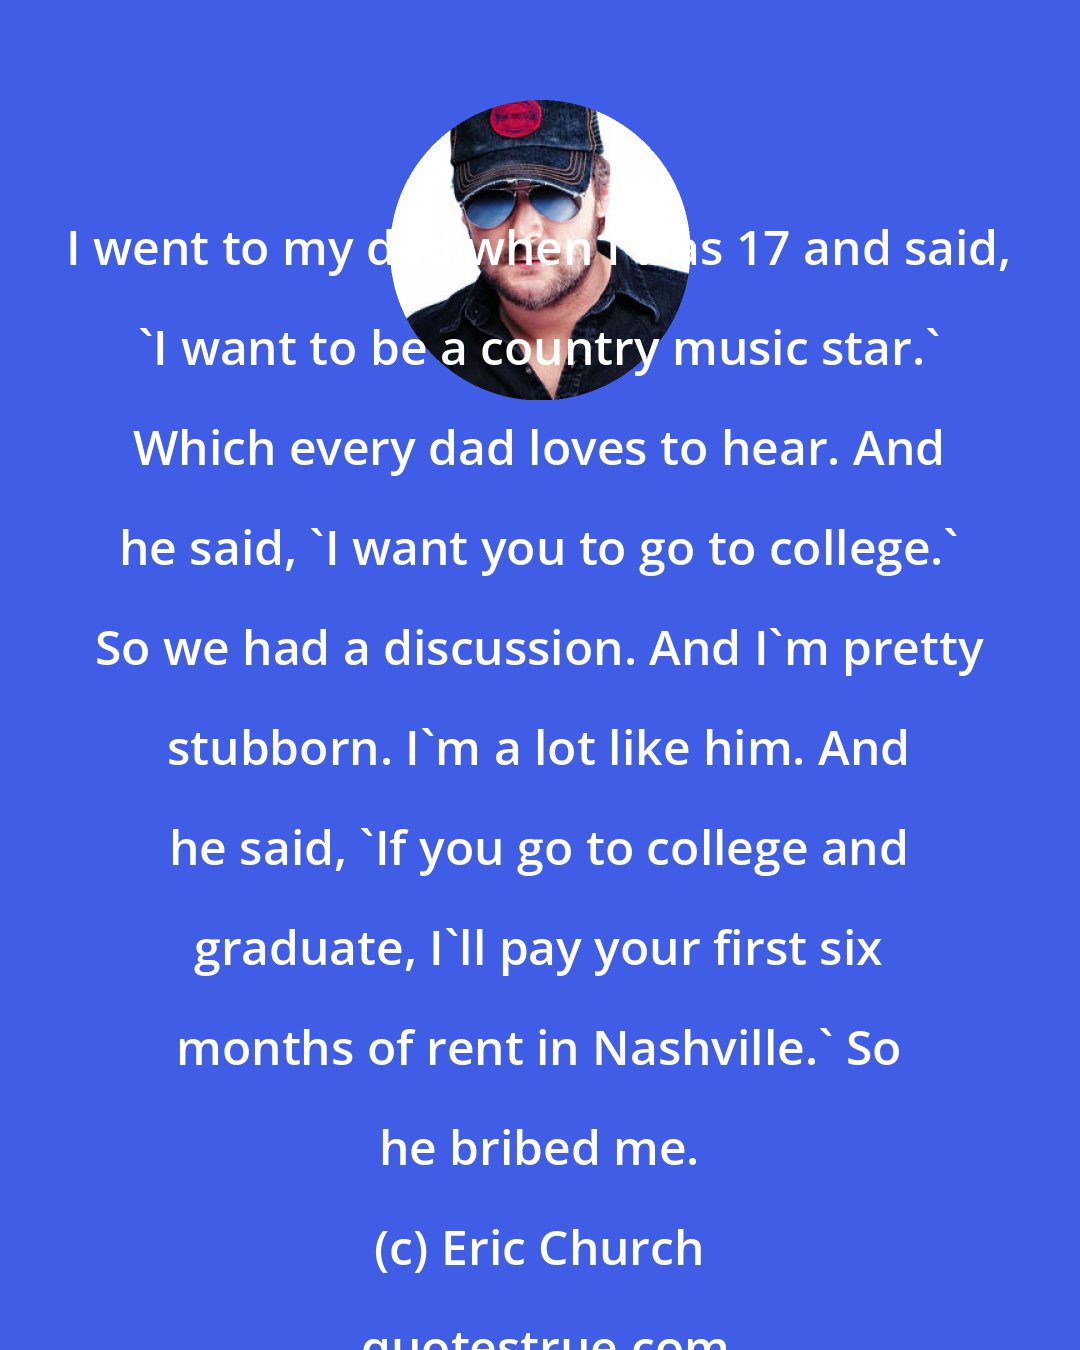 Eric Church: I went to my dad when I was 17 and said, 'I want to be a country music star.' Which every dad loves to hear. And he said, 'I want you to go to college.' So we had a discussion. And I'm pretty stubborn. I'm a lot like him. And he said, 'If you go to college and graduate, I'll pay your first six months of rent in Nashville.' So he bribed me.